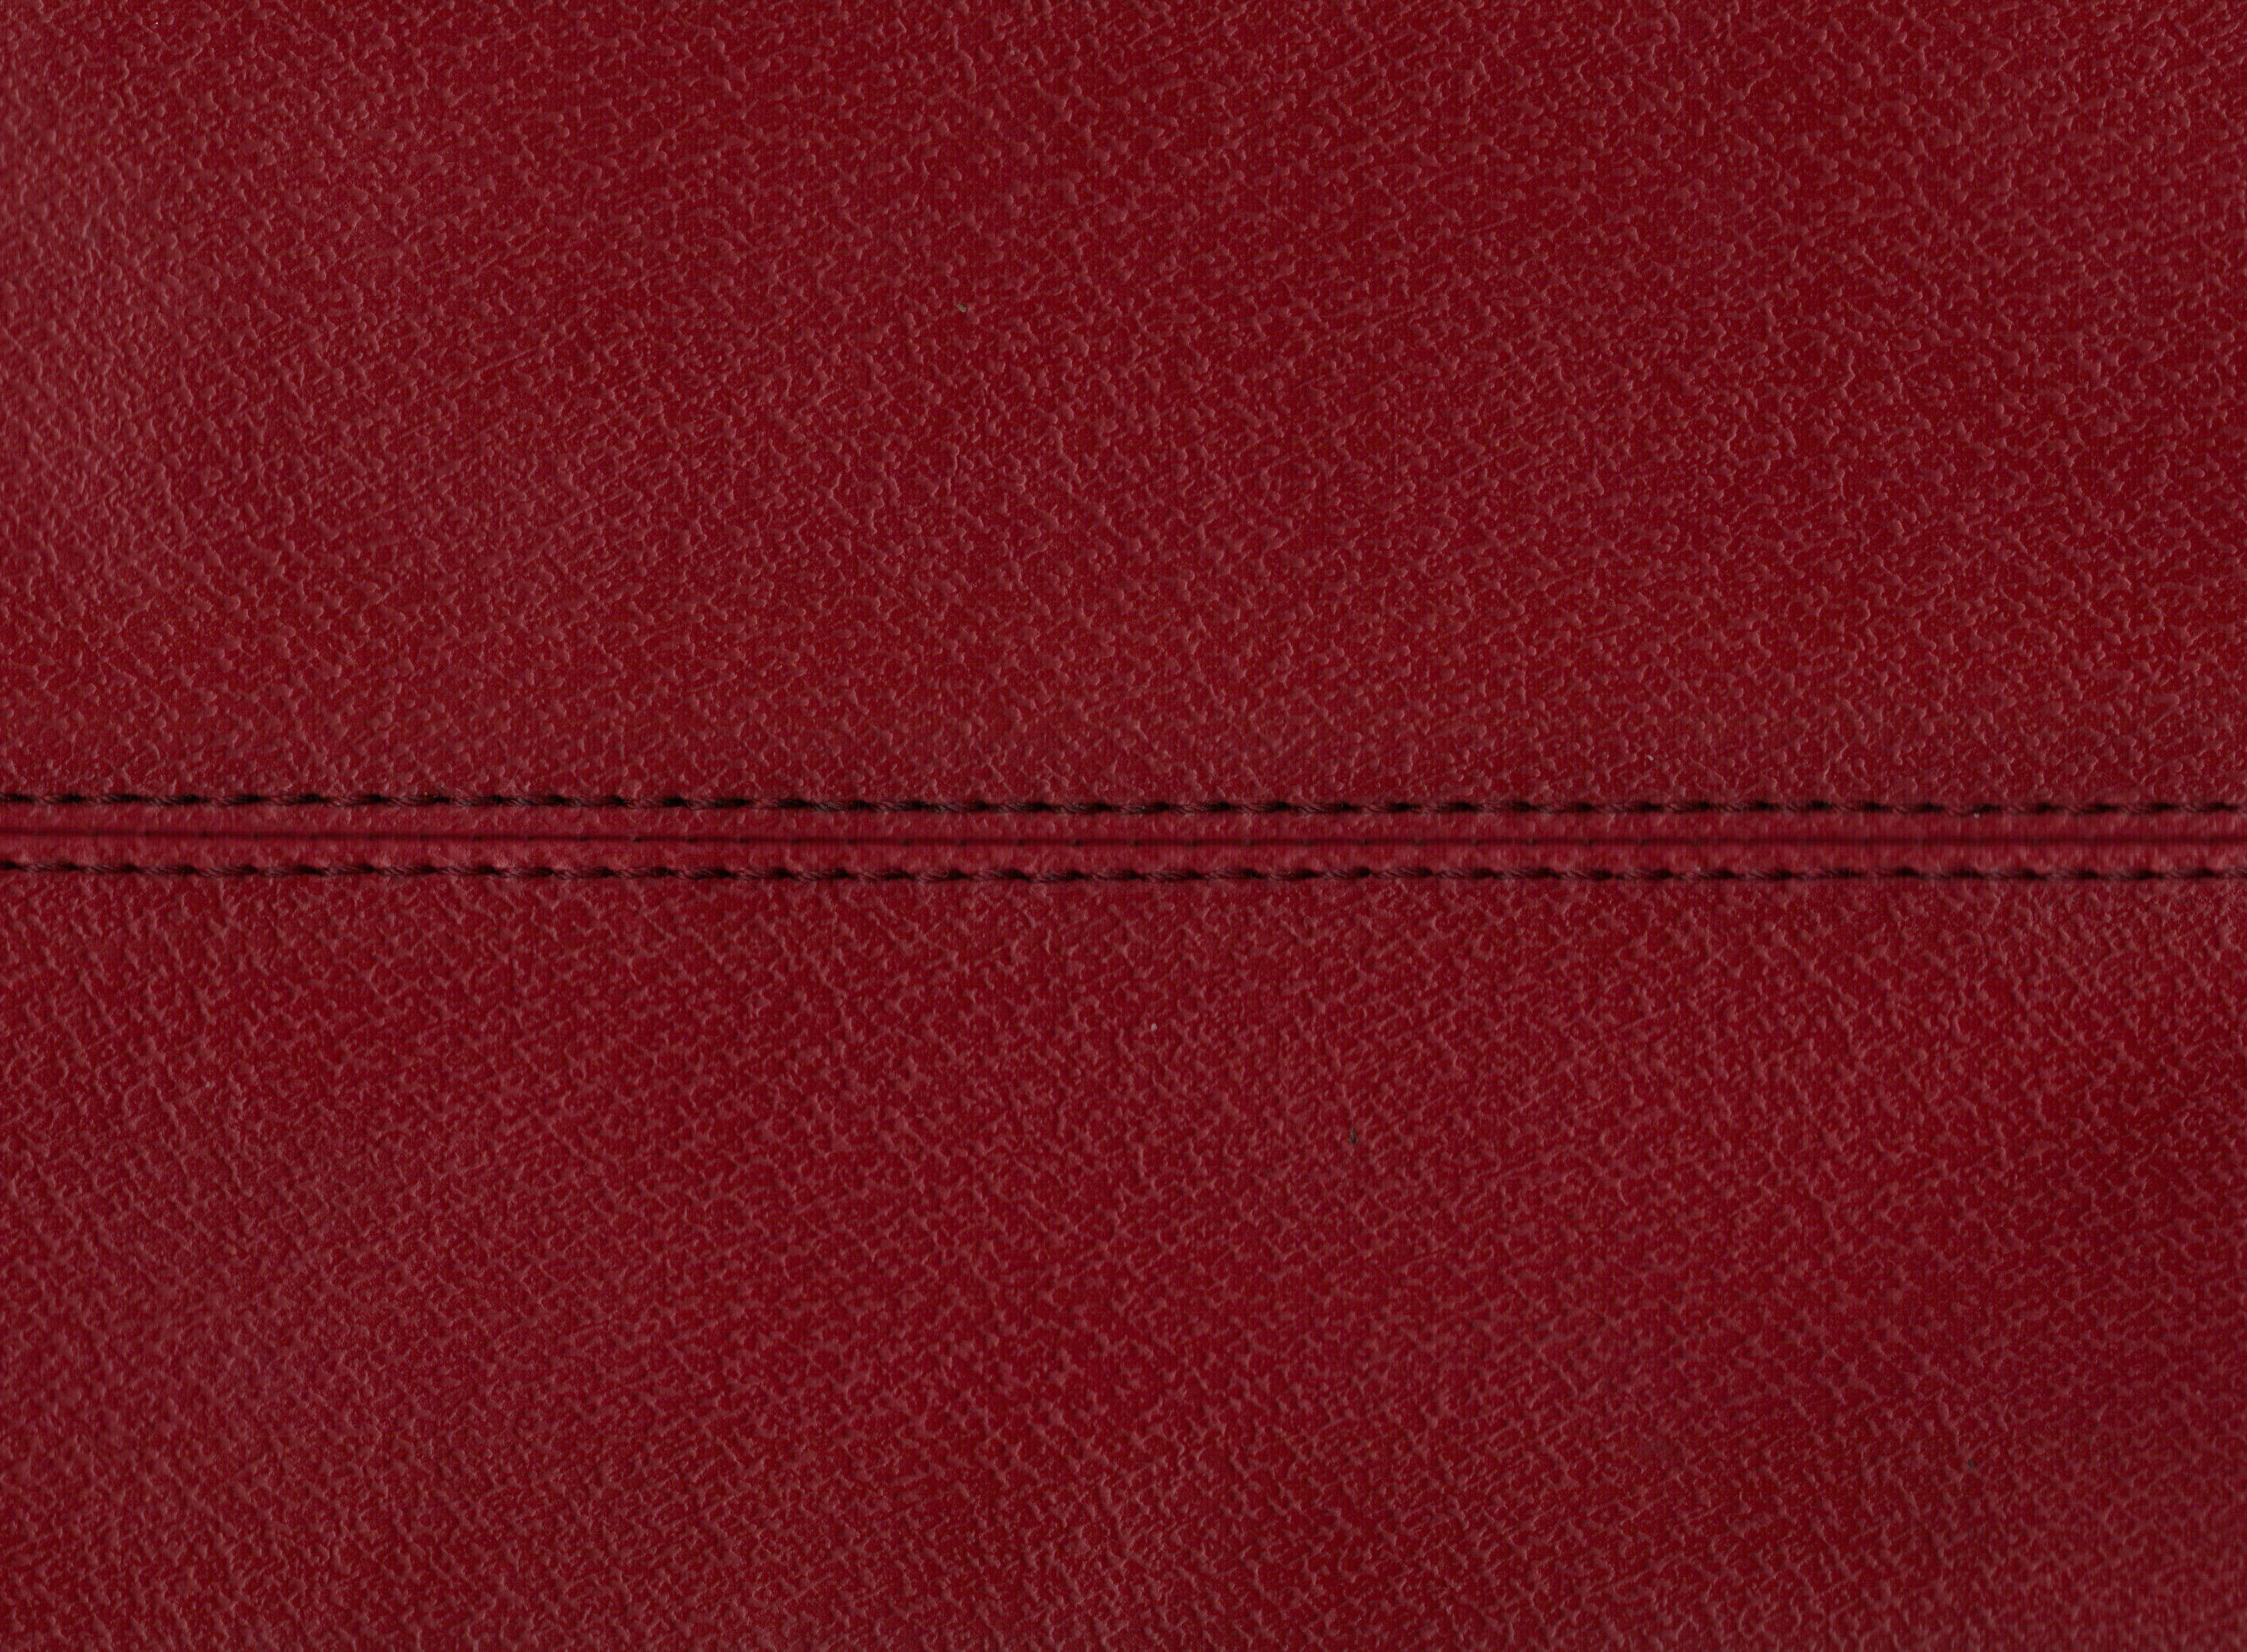 Red Leather Textures Jpg Onlygfx Com